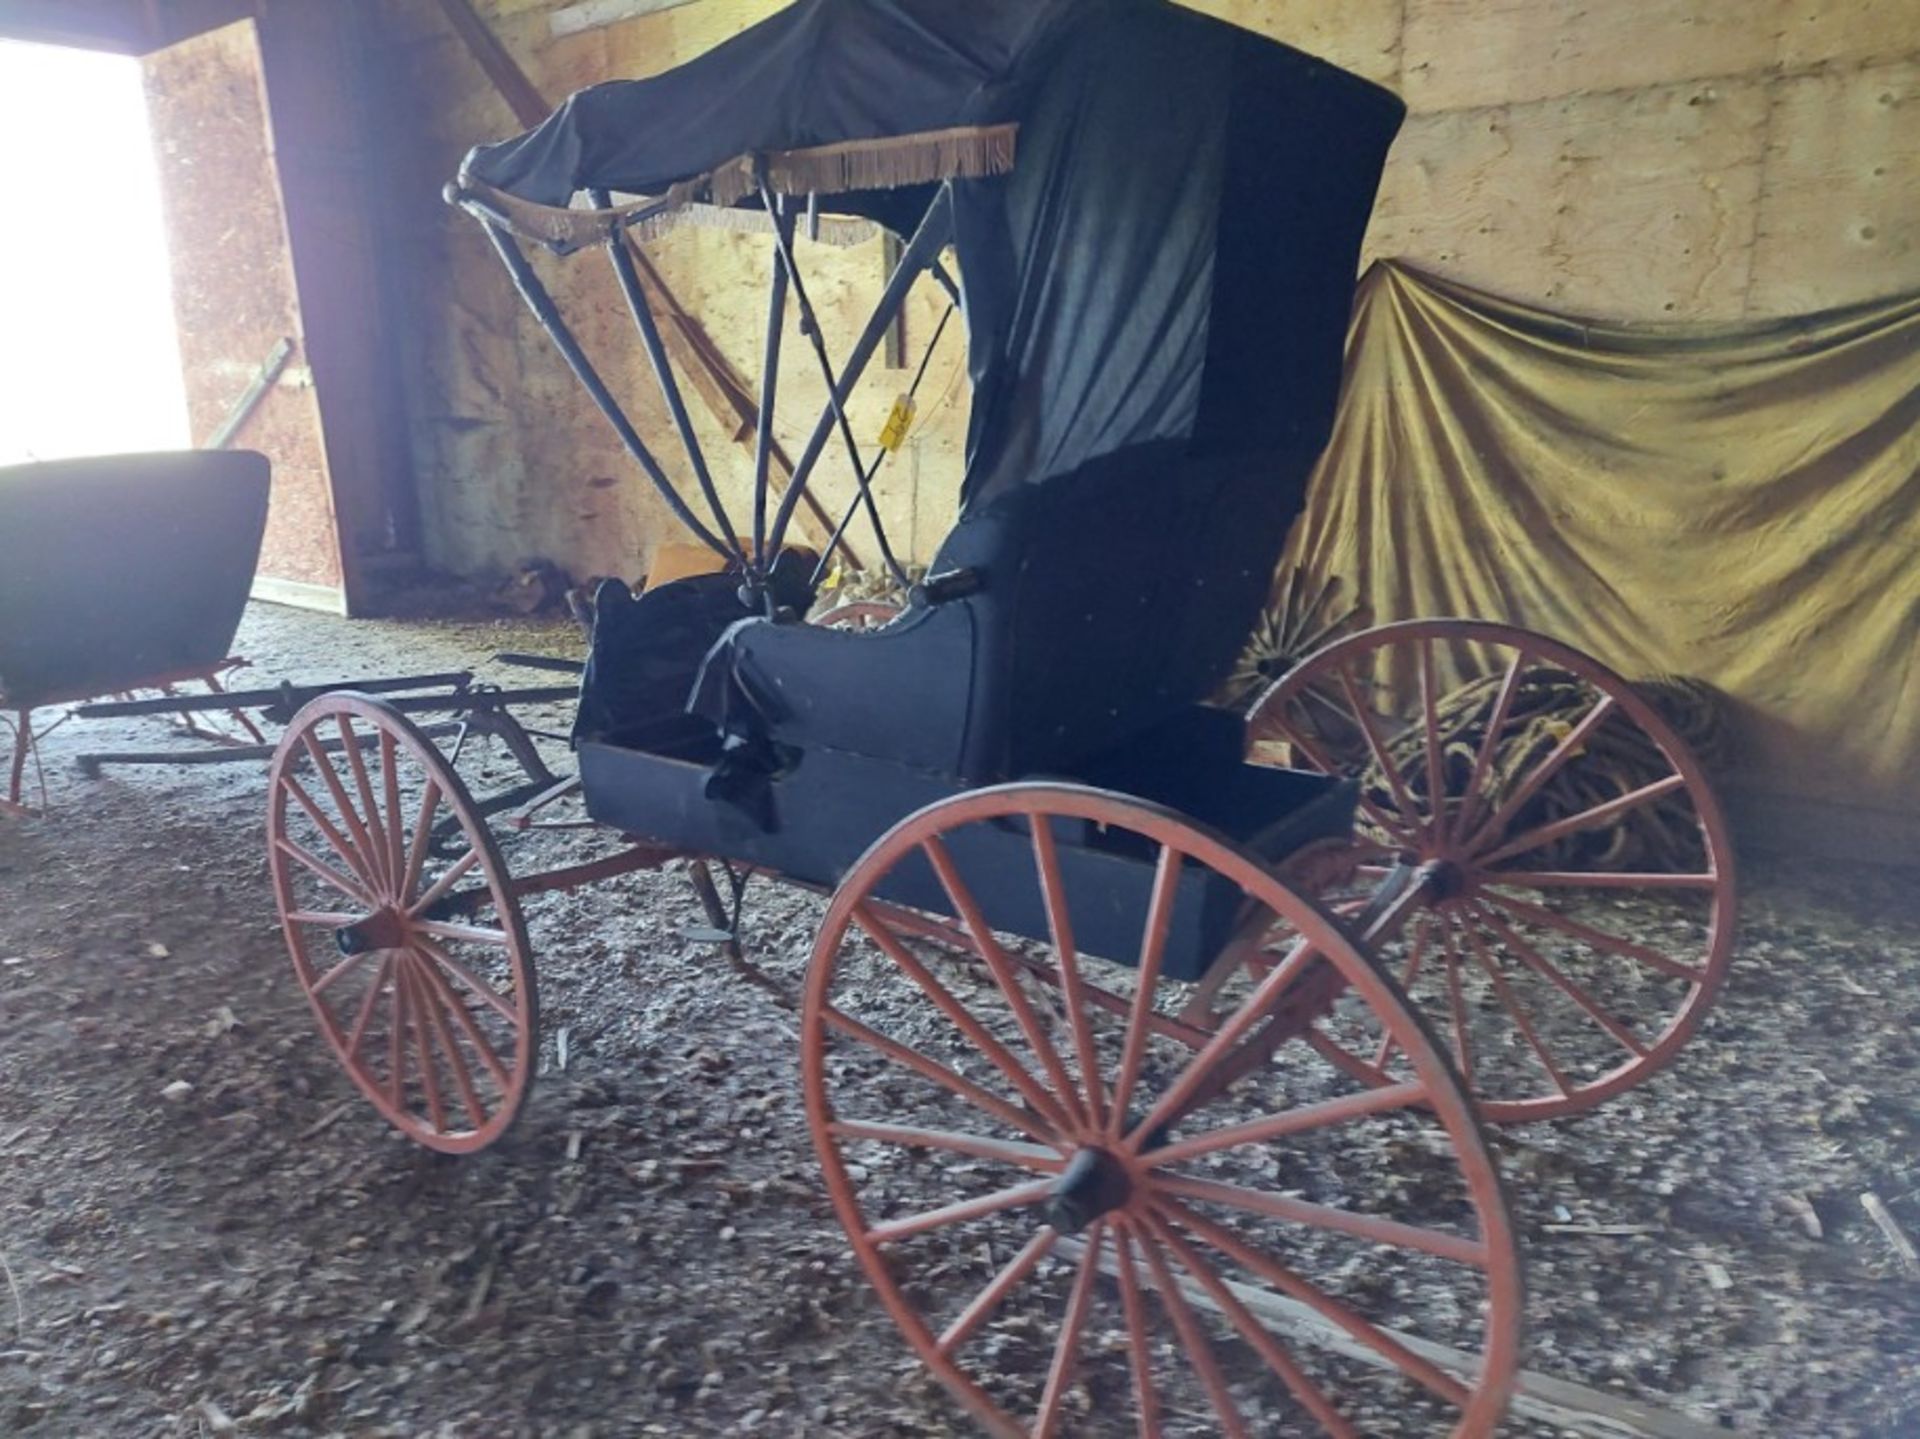 ANTIQUE HORSE DRAWN DOCTORS BUGGY (SAID TO BE ORIGINAL) - Image 4 of 7